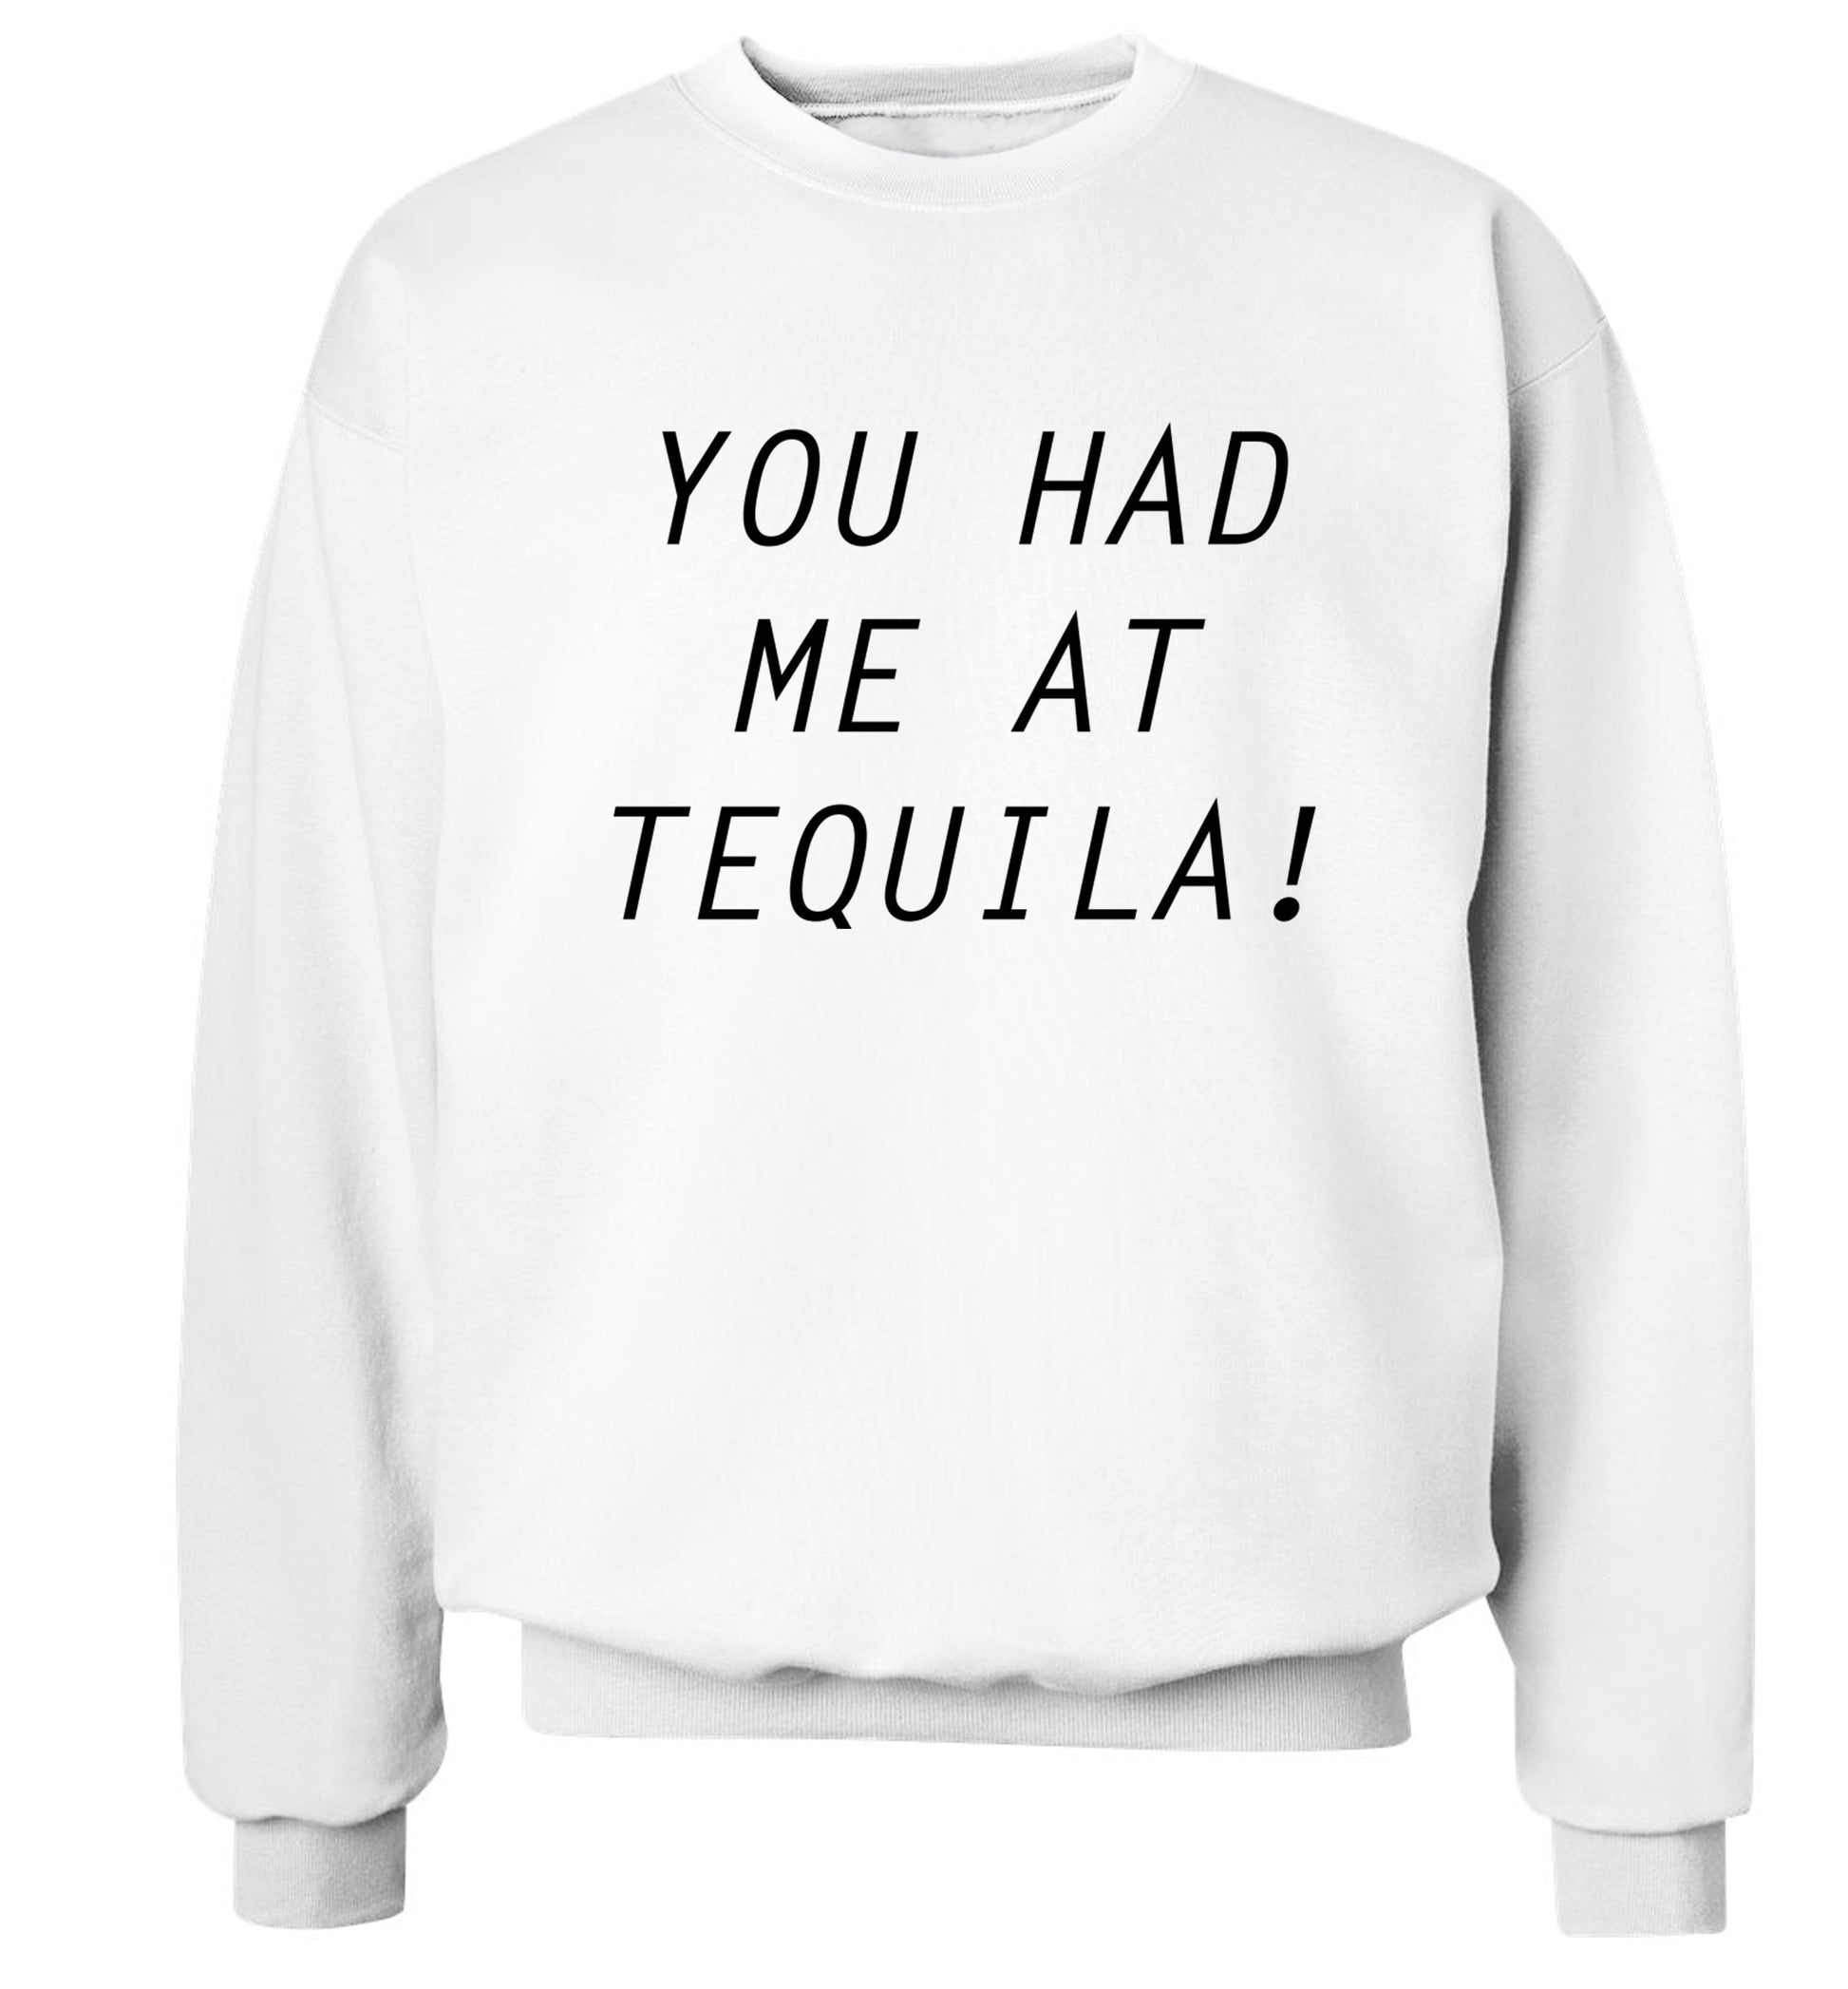 You had me at tequila Adult's unisex white Sweater 2XL